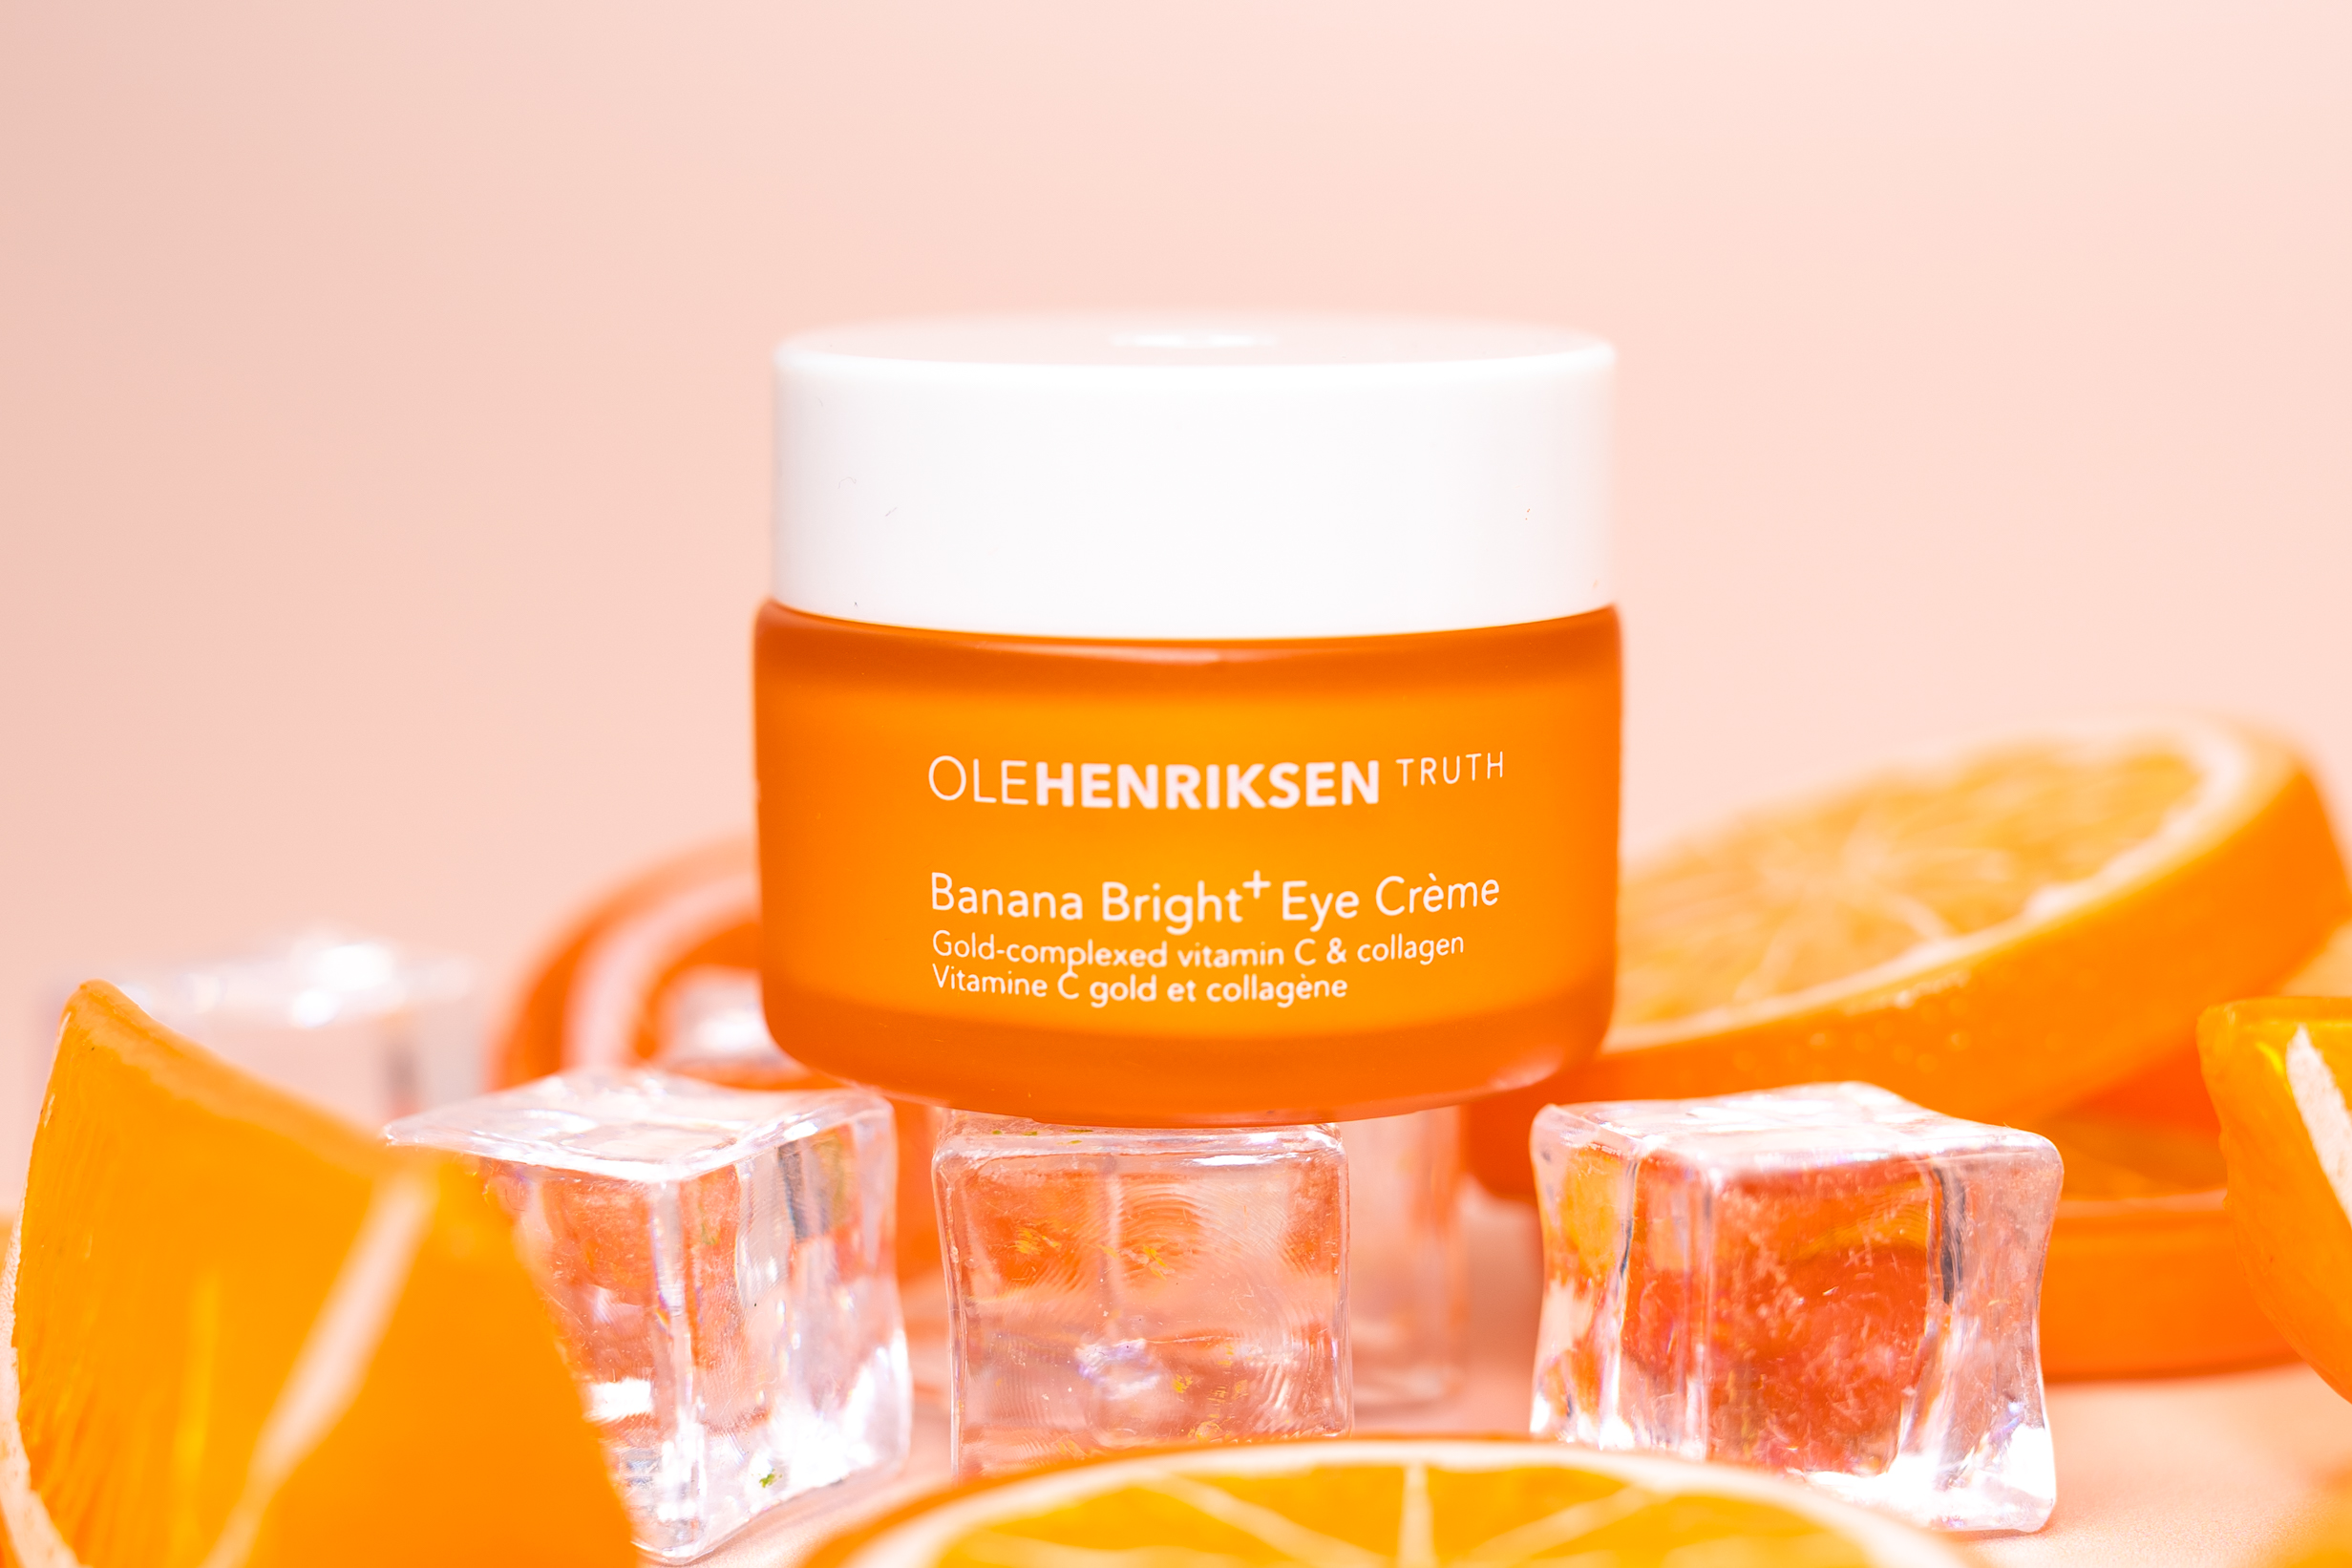 THE EXCLUSIVE BEAUTY DIARY : OLE HENRIKSEN BANANA BRIGHT EYE CRÈME